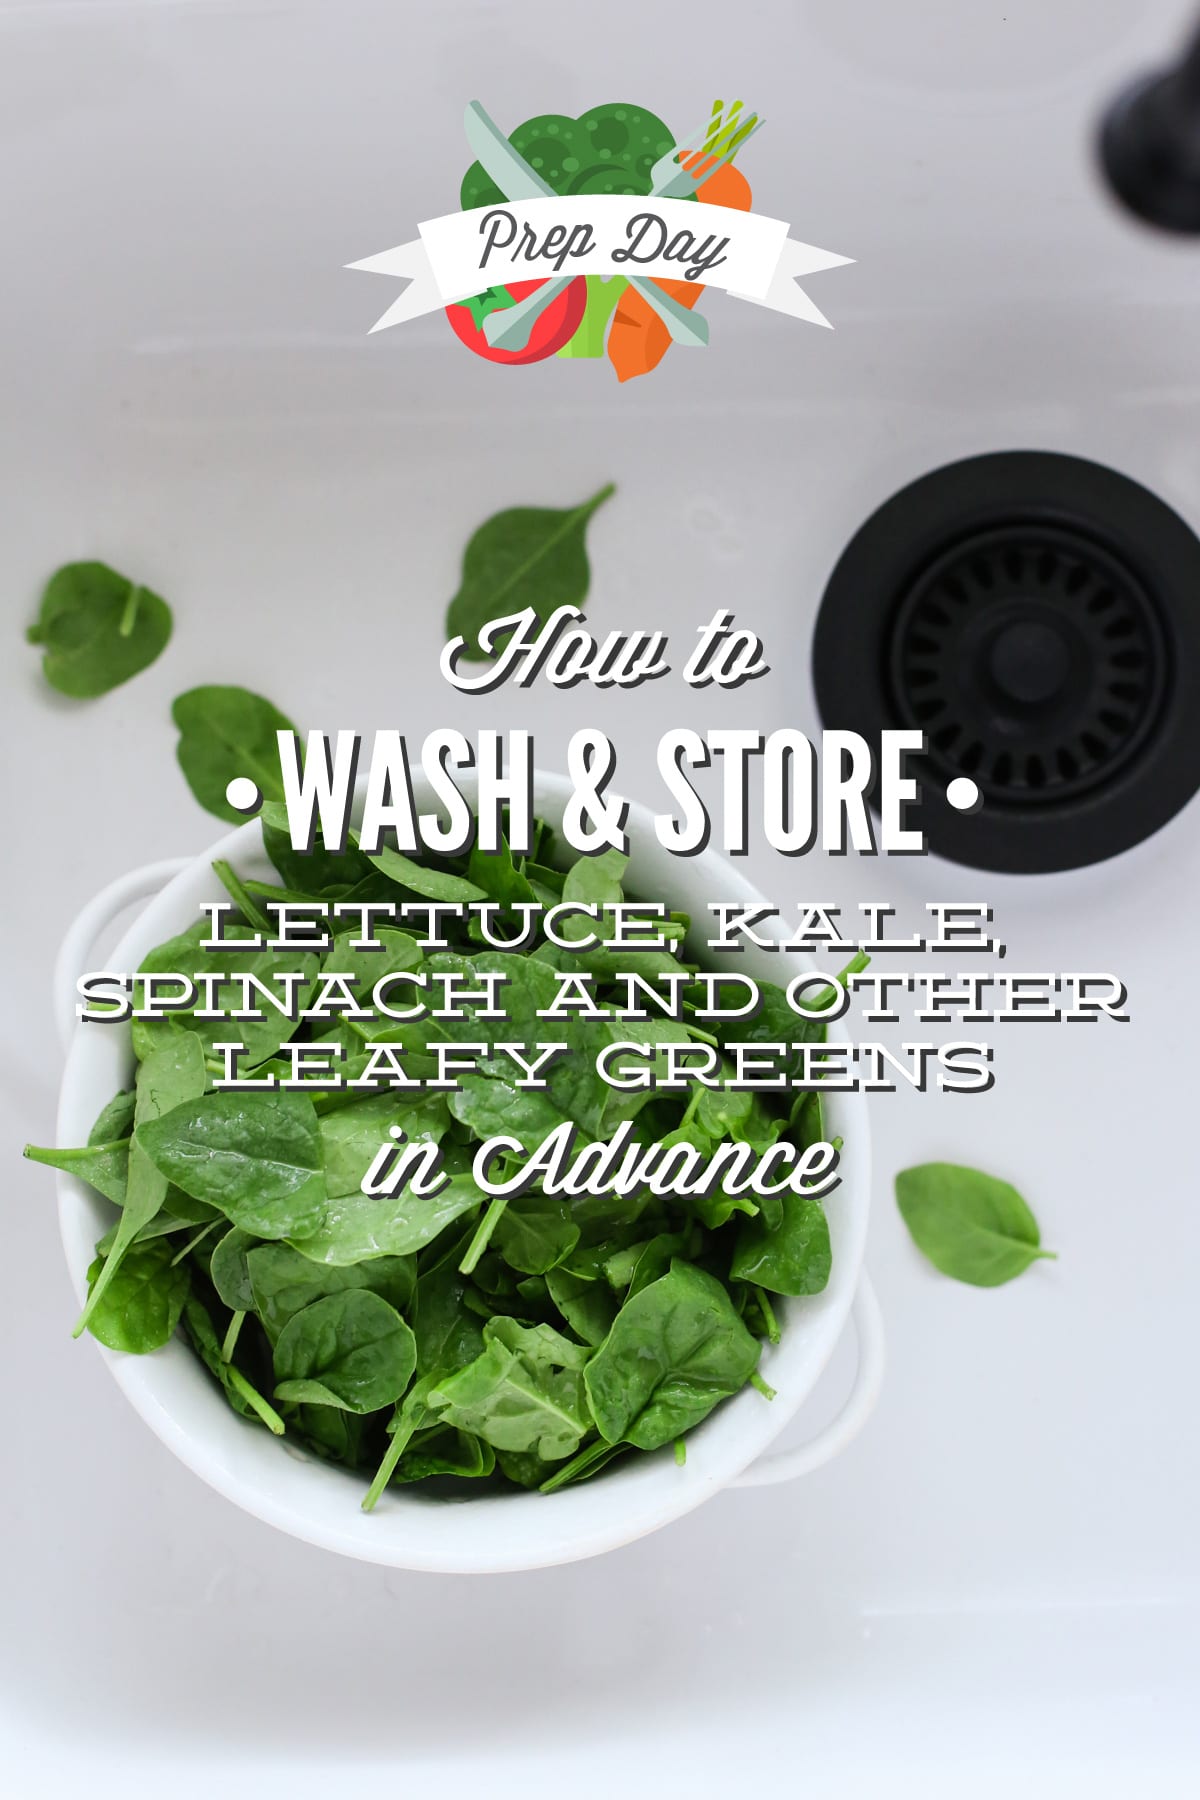 Prep Day: How to Wash and Store Lettuce, Kale, Spinach and Other Leafy Greens in Advance